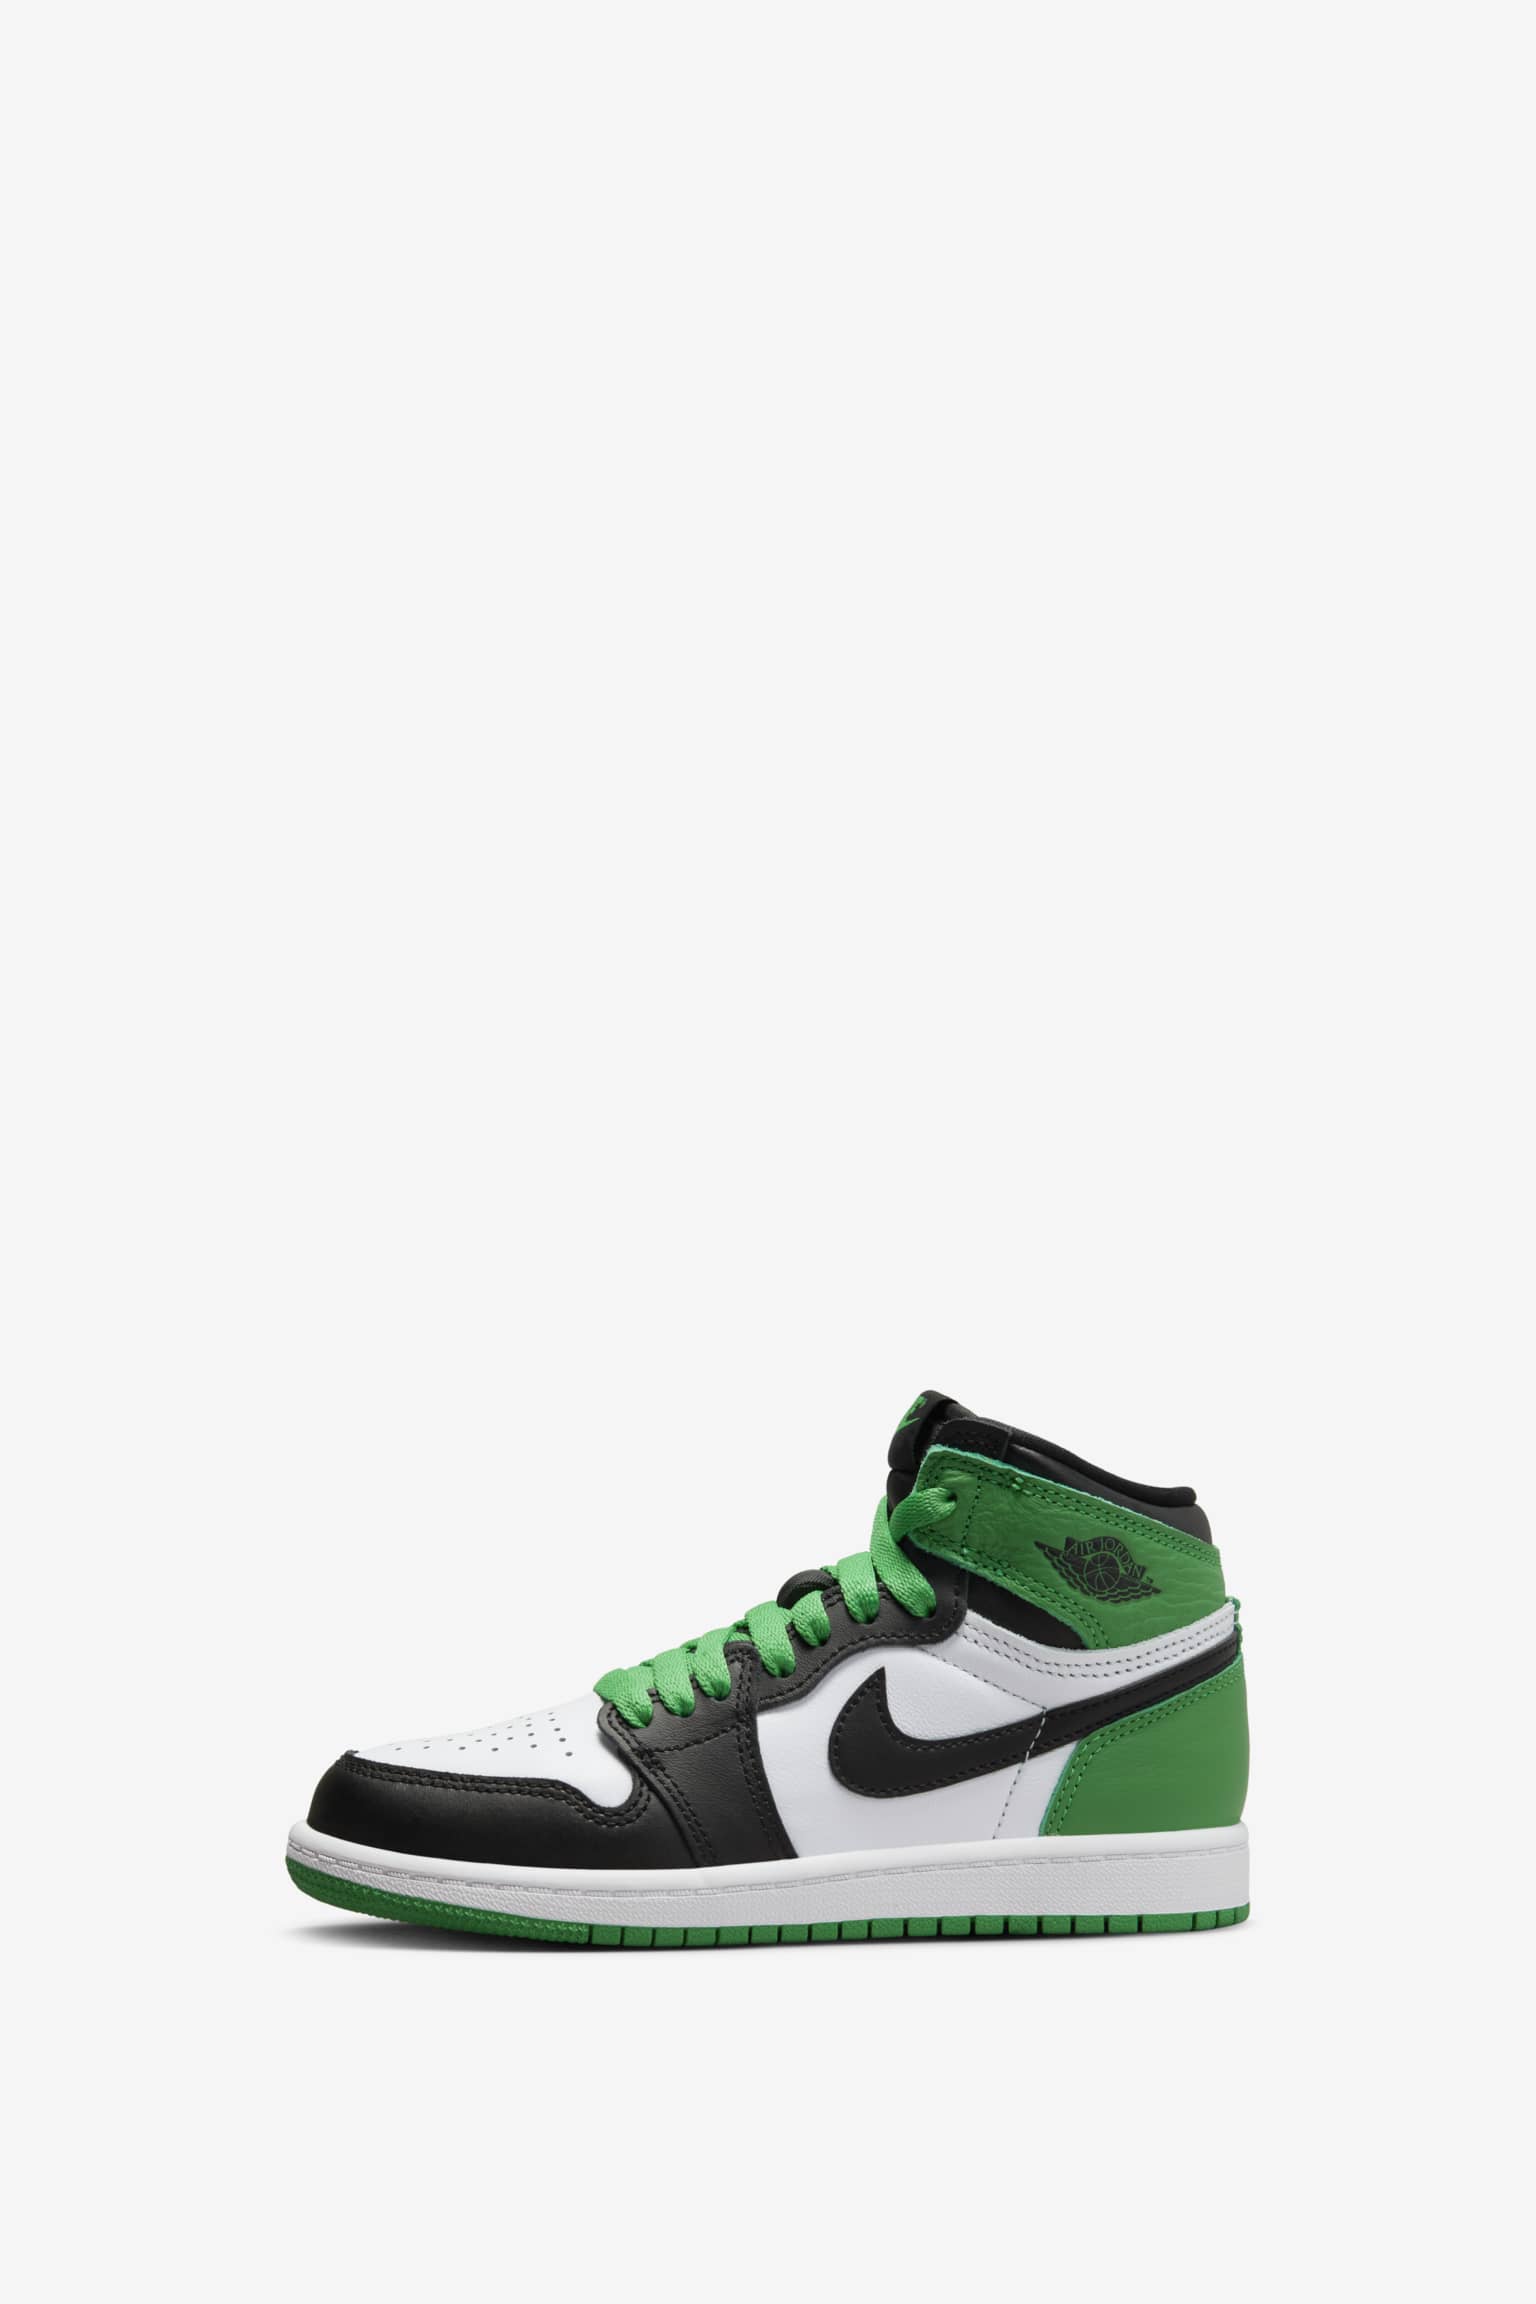 NIKE　エアジョーダン1 black and lucky green